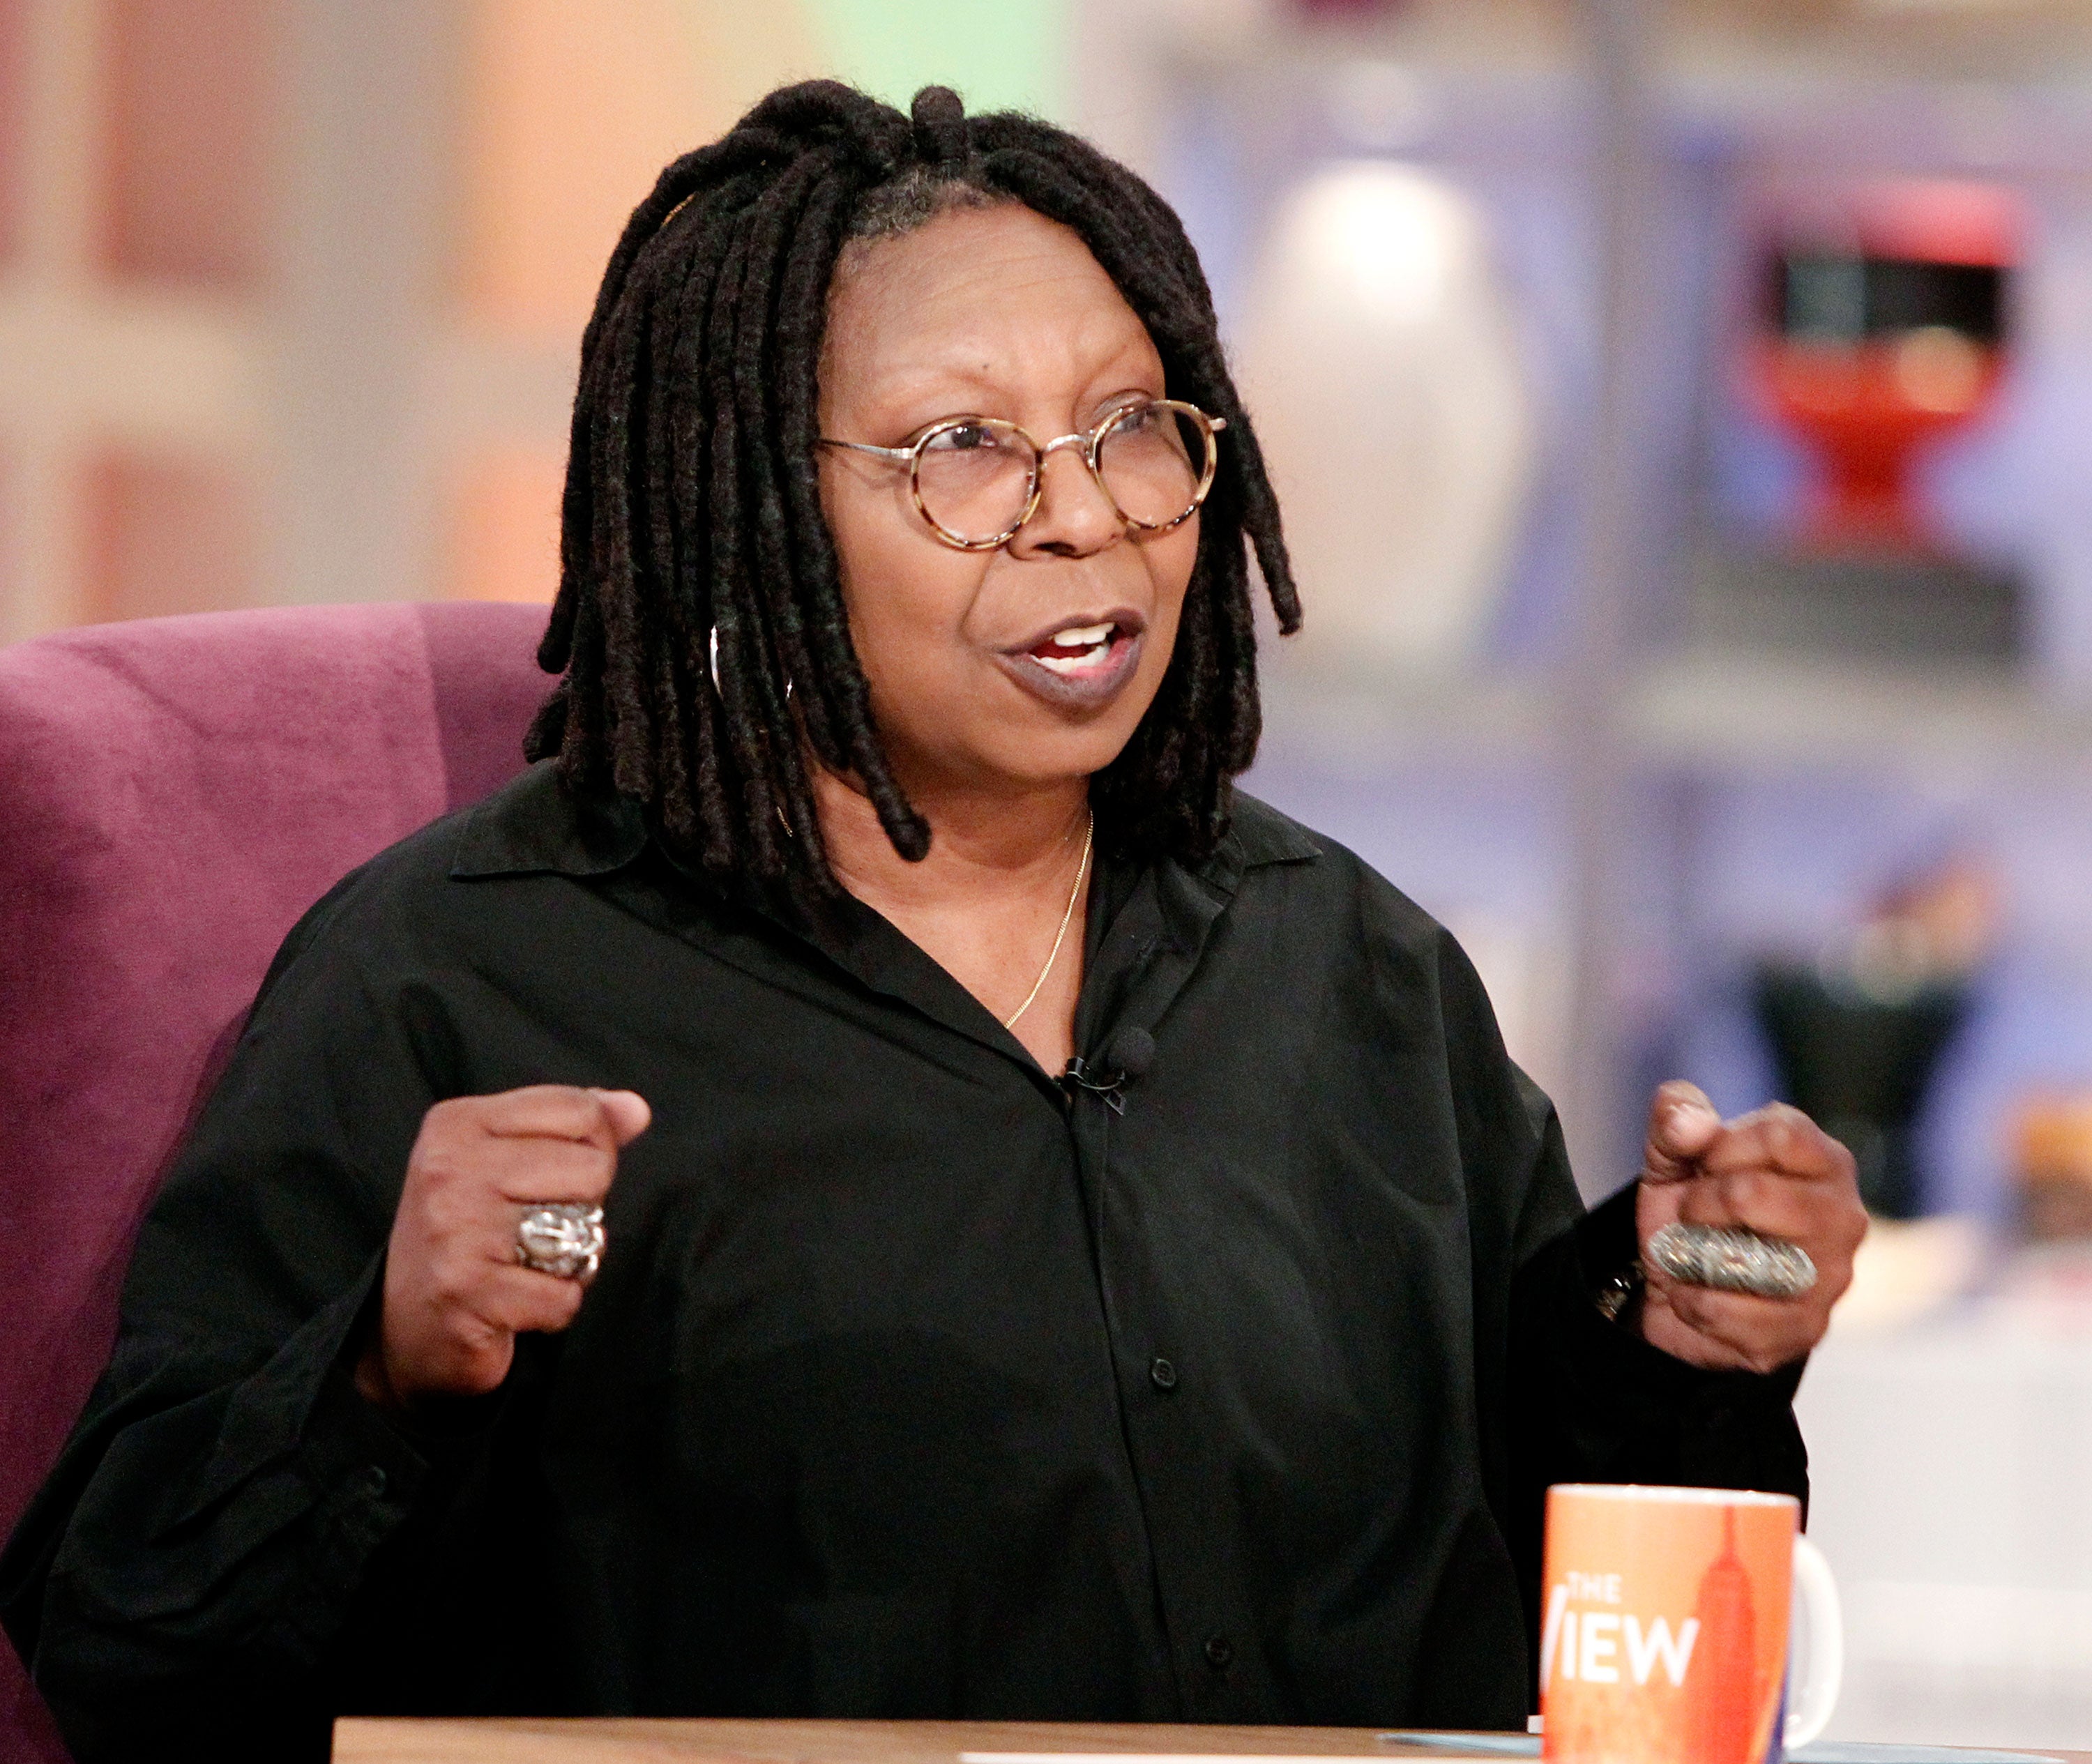 Whoopi Goldberg Goes After Activist DeRay Mckesson For ‘Planet Of The Apes’ Comment
